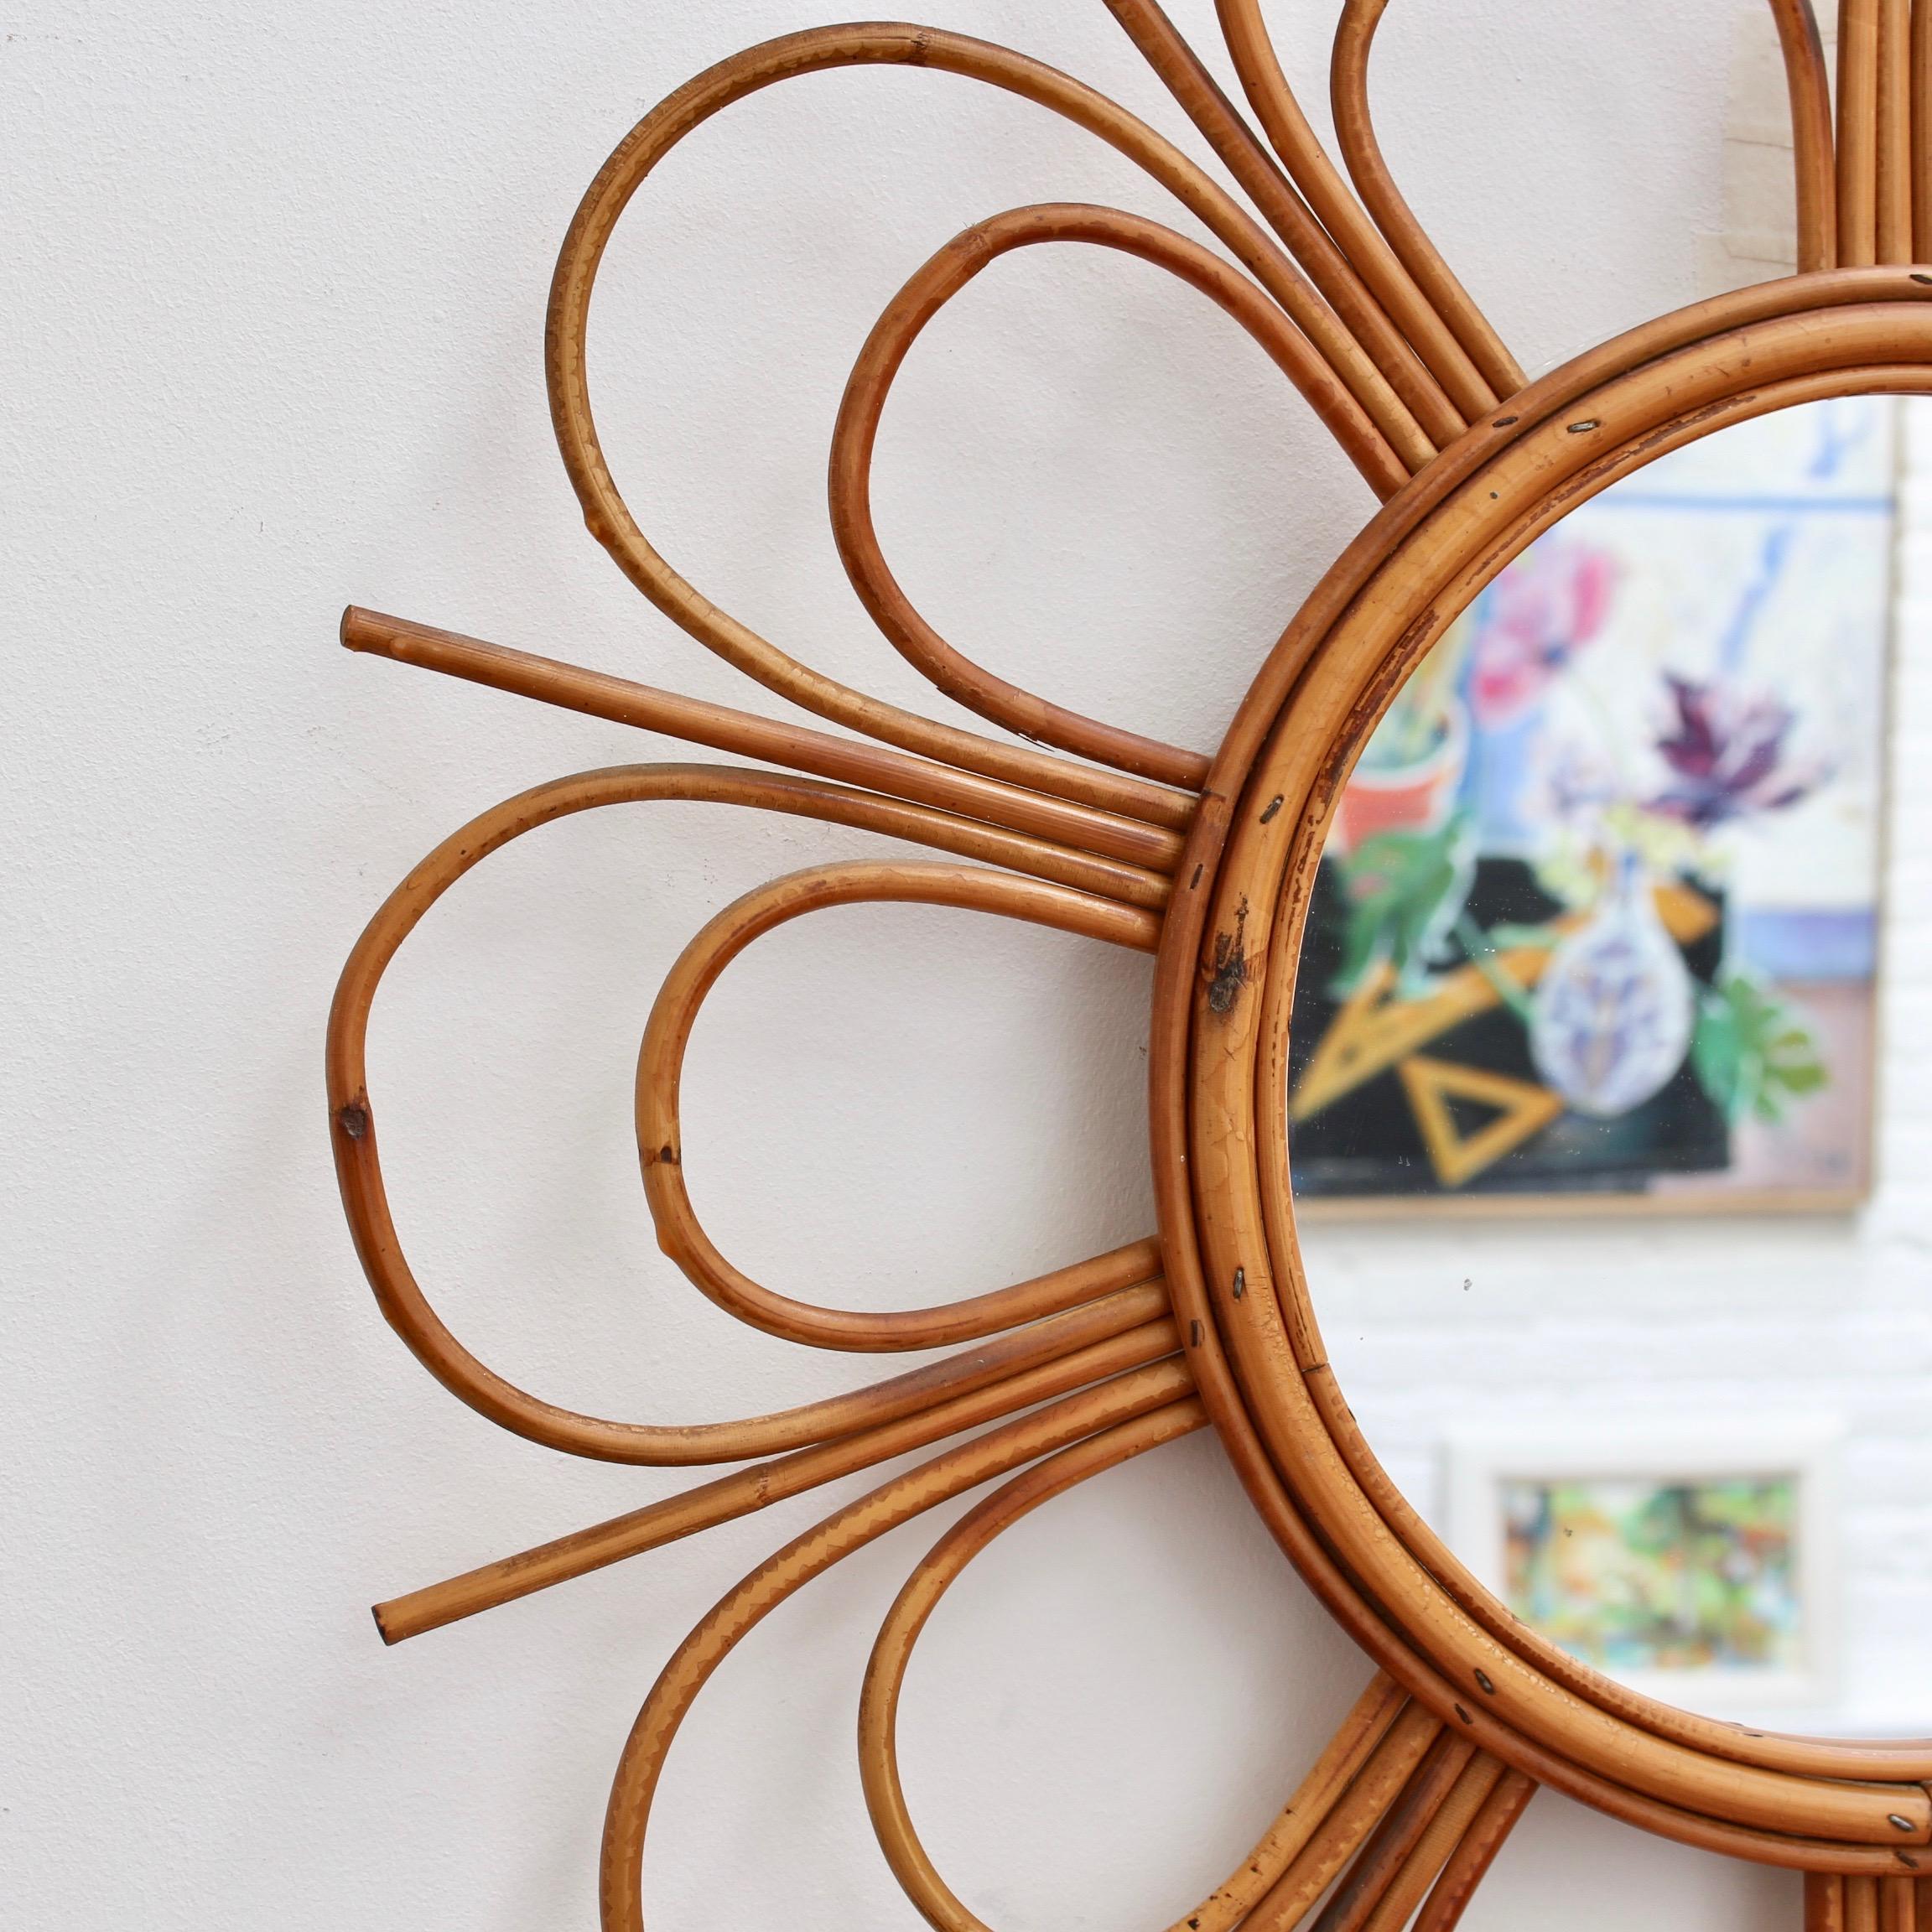 Mid-20th Century Midcentury French Rattan Flower-Shaped Wall Mirror, circa 1960s